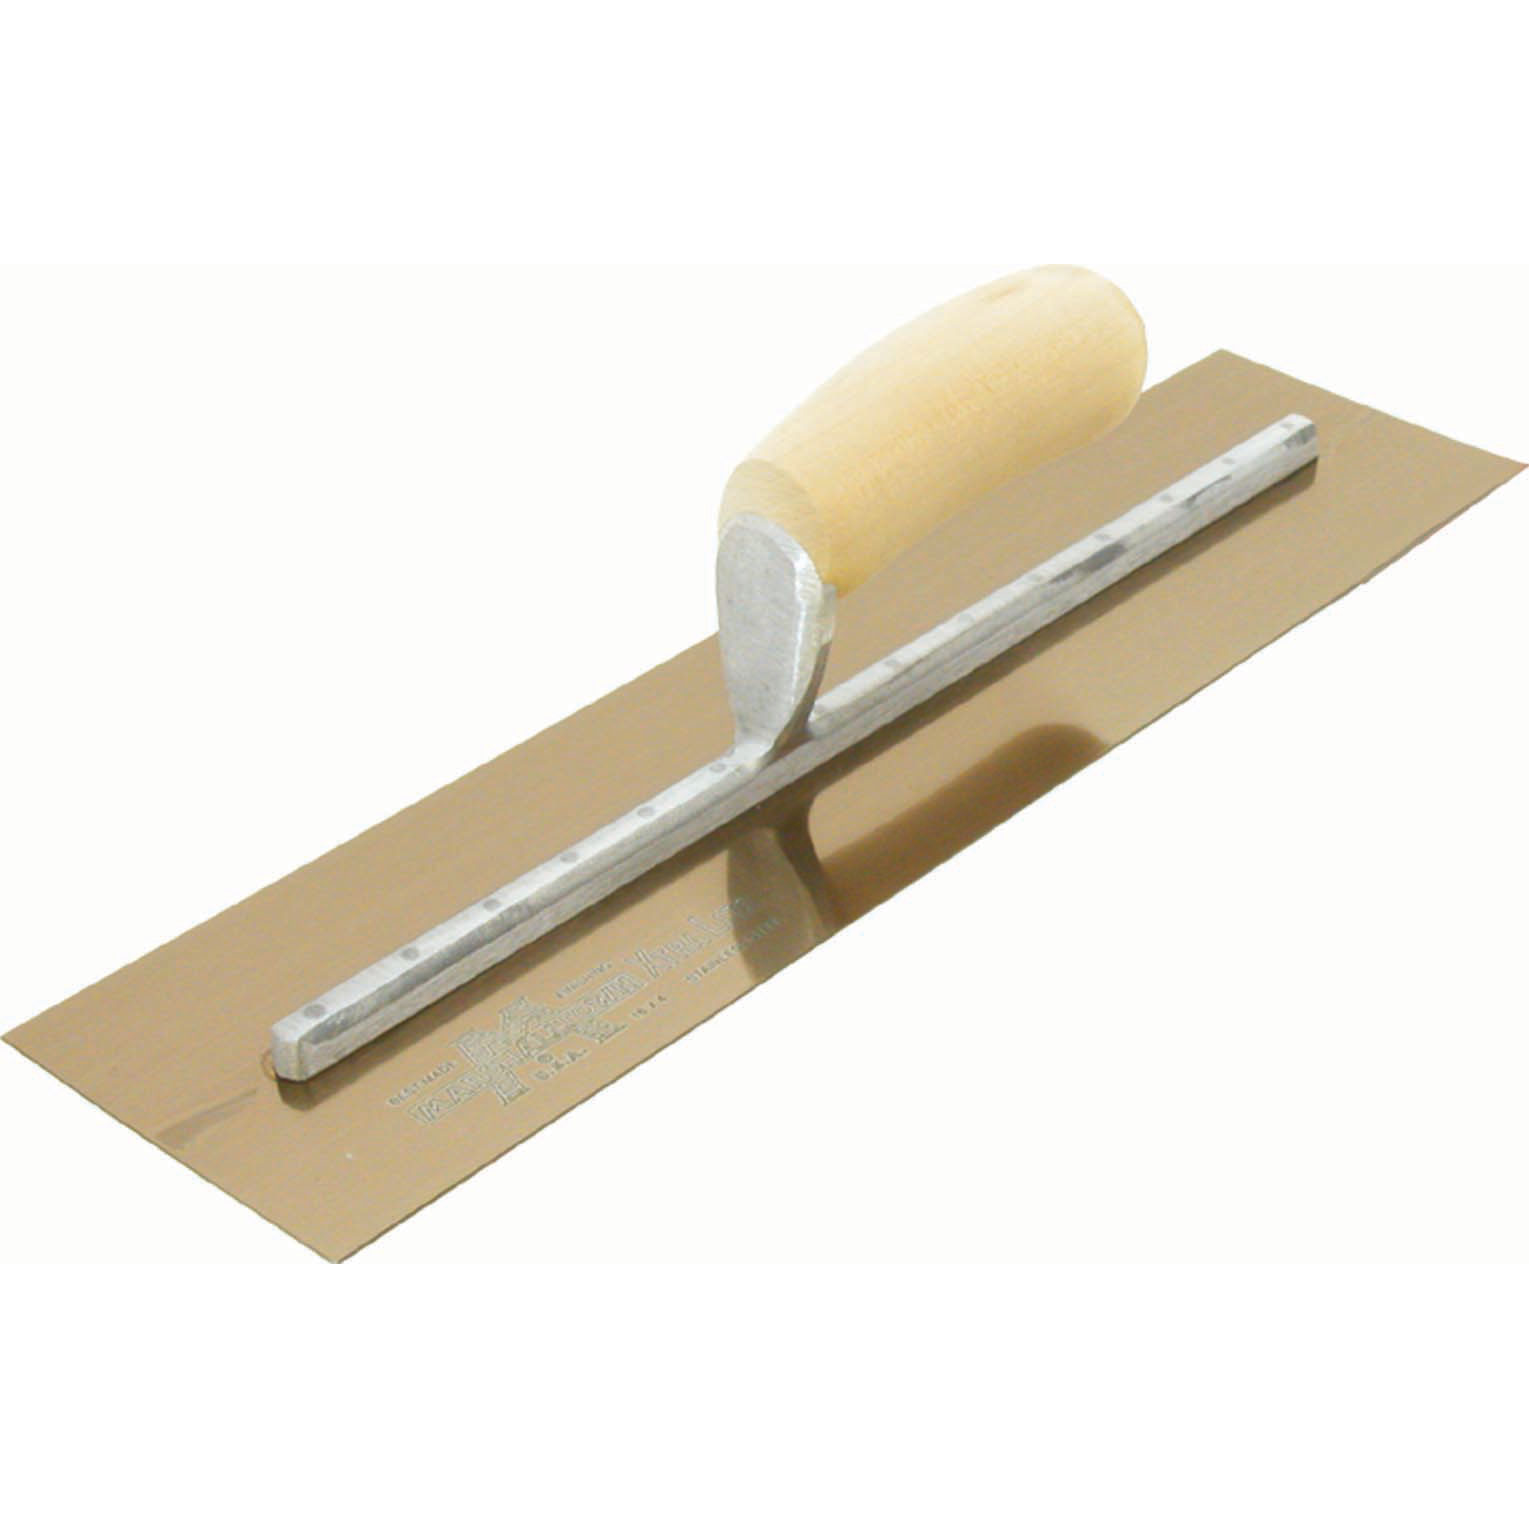 Marshalltown MXS66GS 16in. x 4in. Golden Stainless Steel Finishing Trowel with Wood MAT-MXS66GS